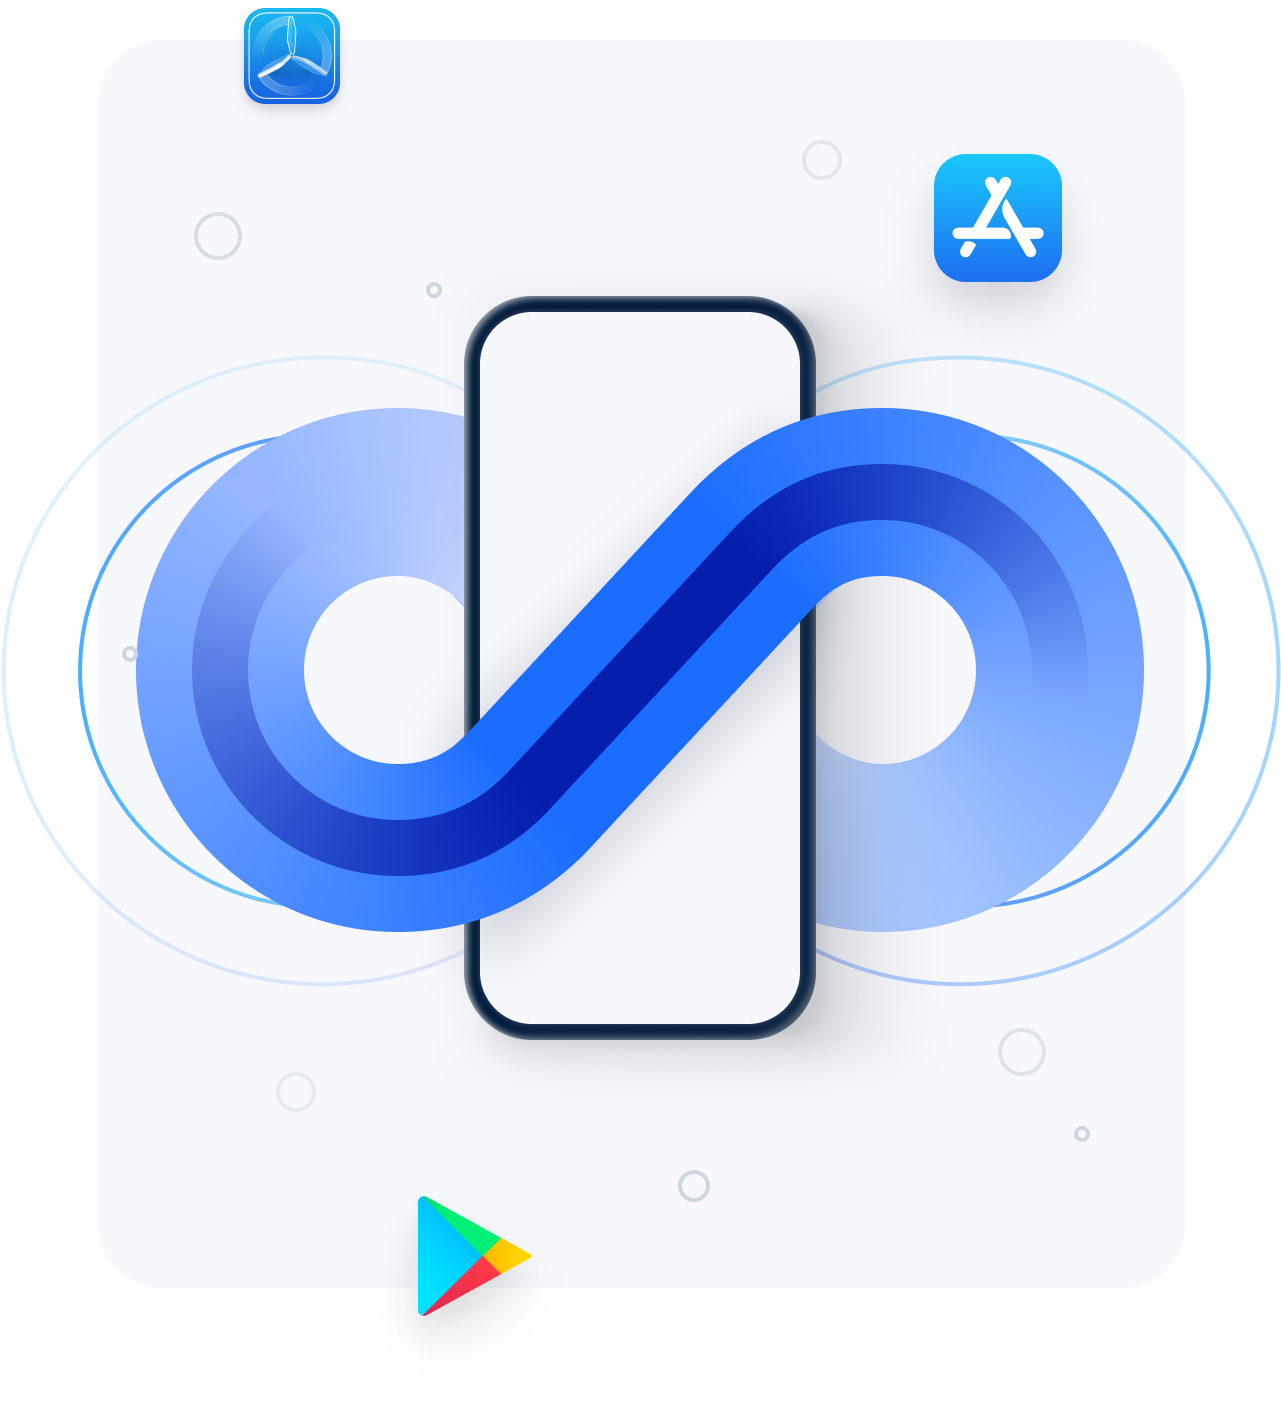 infinity symbol surrounded by testlight, apple app store, and google play icons